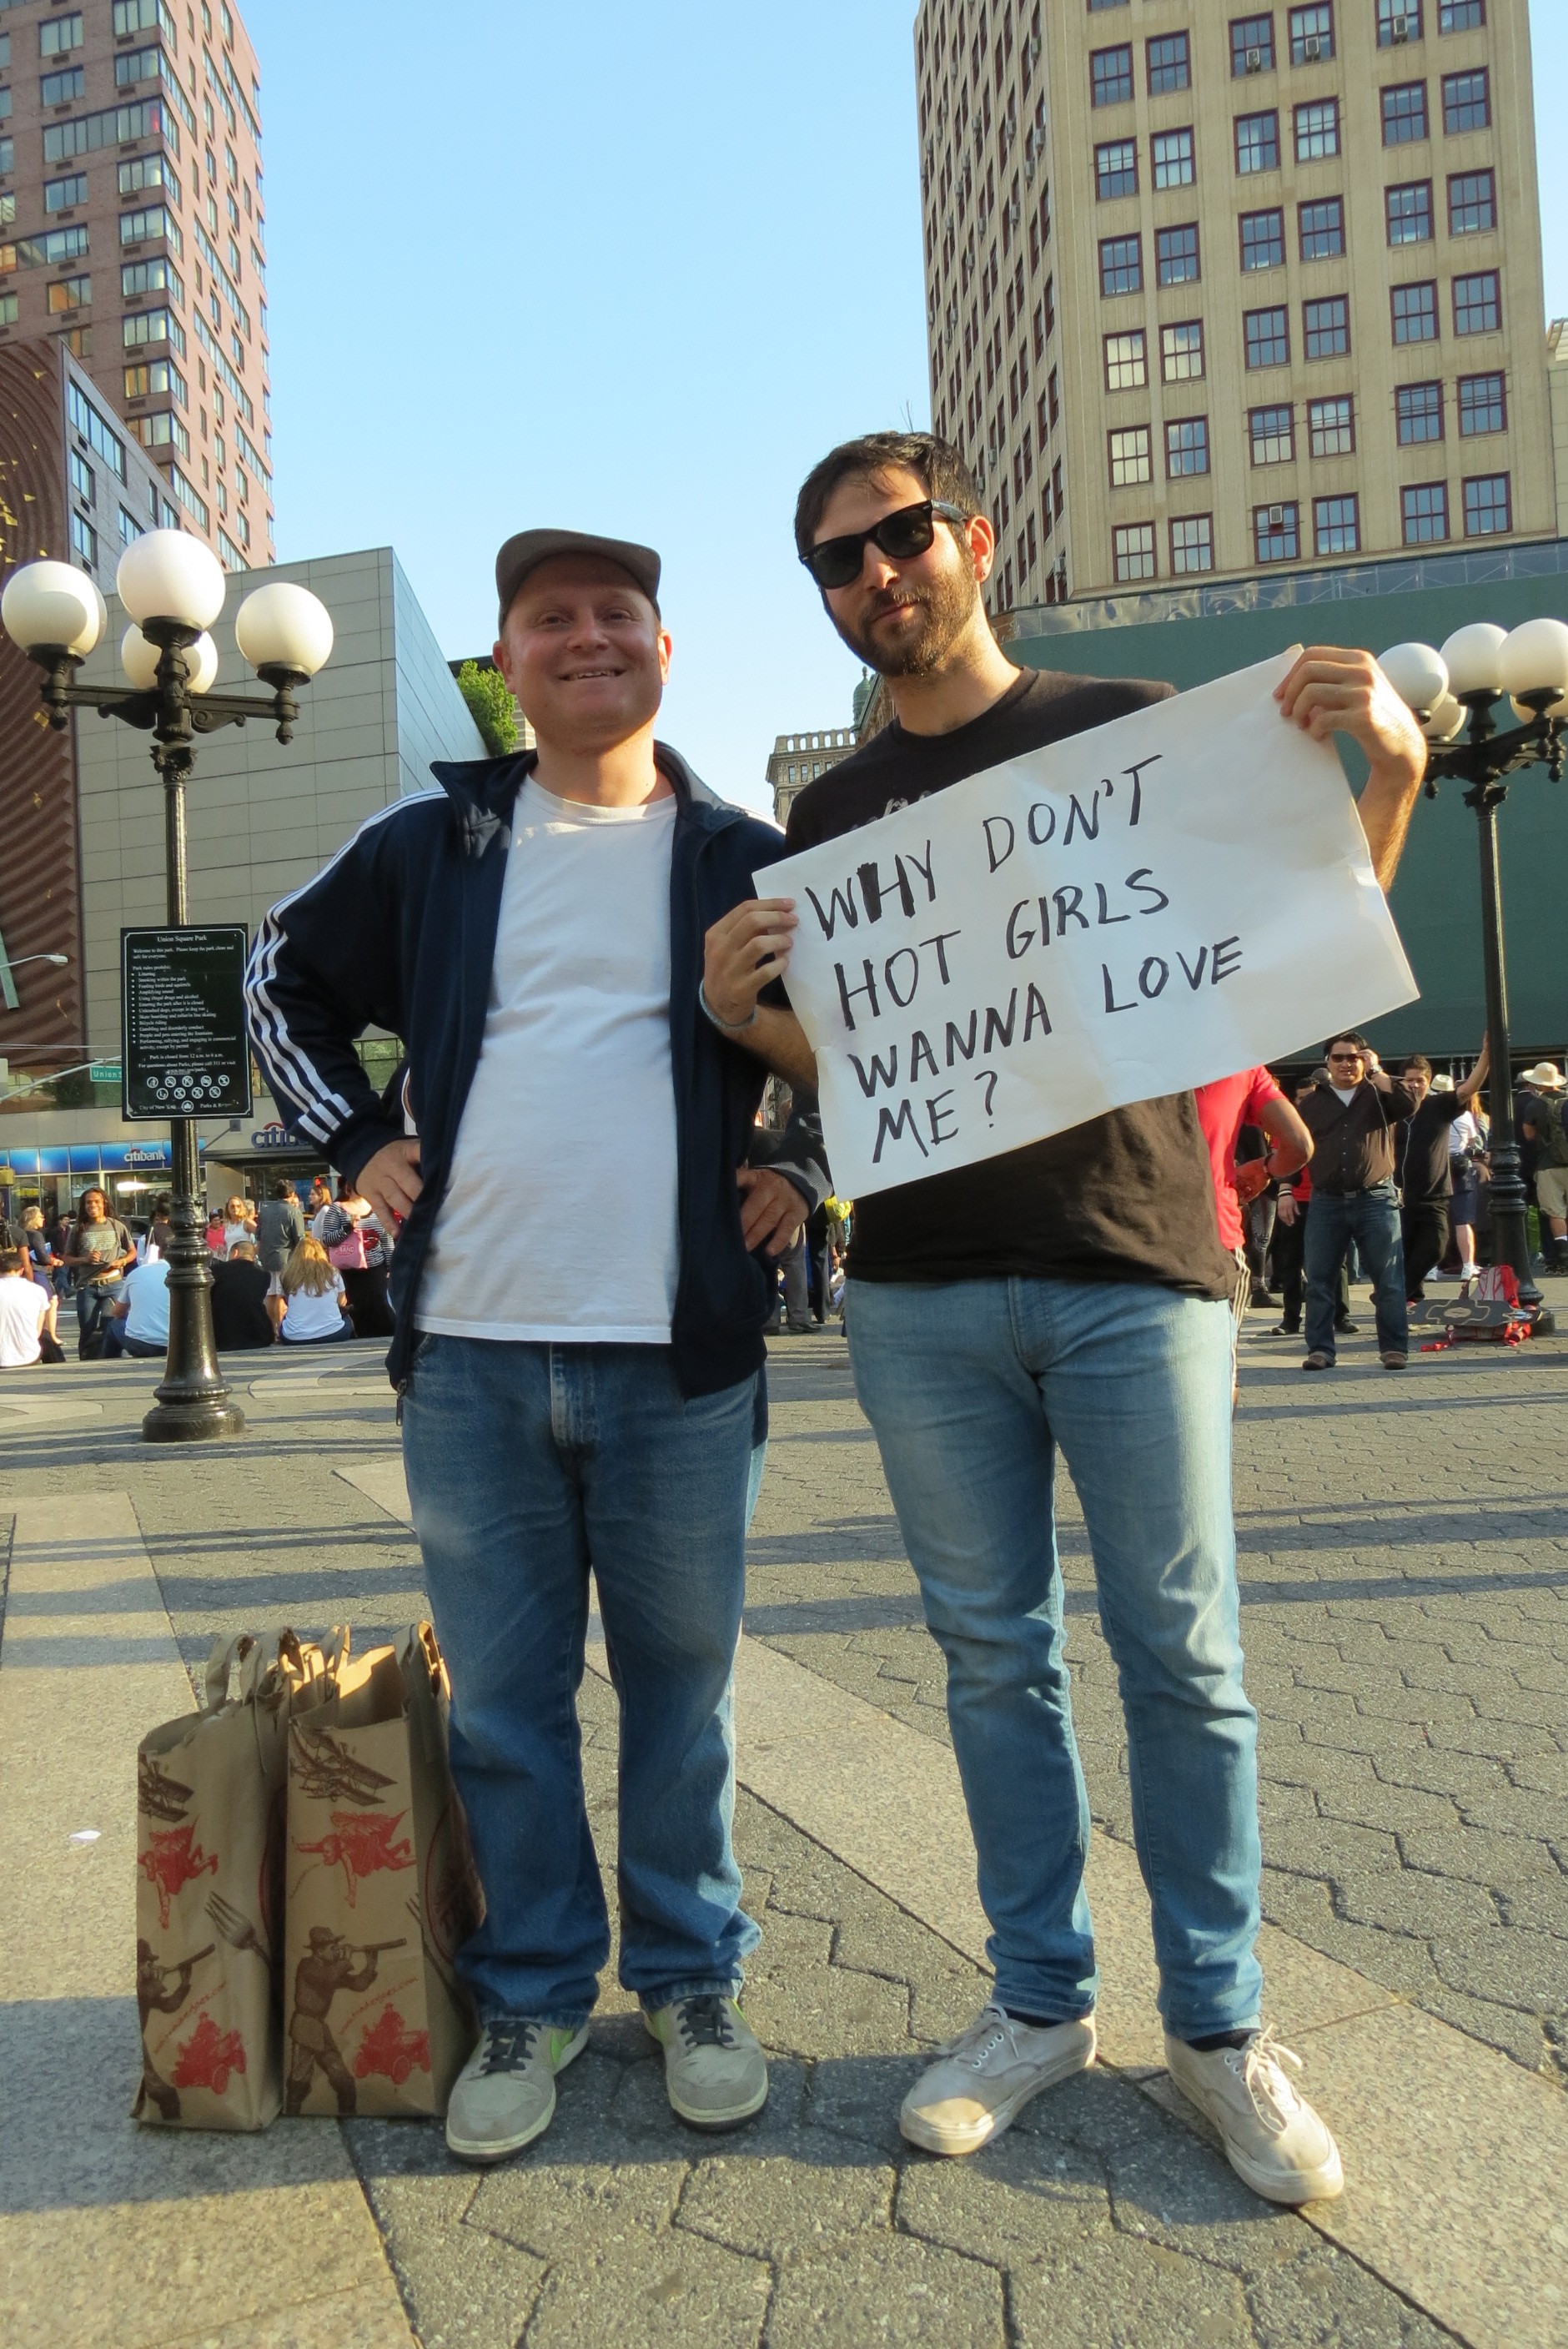 Men with funny sign